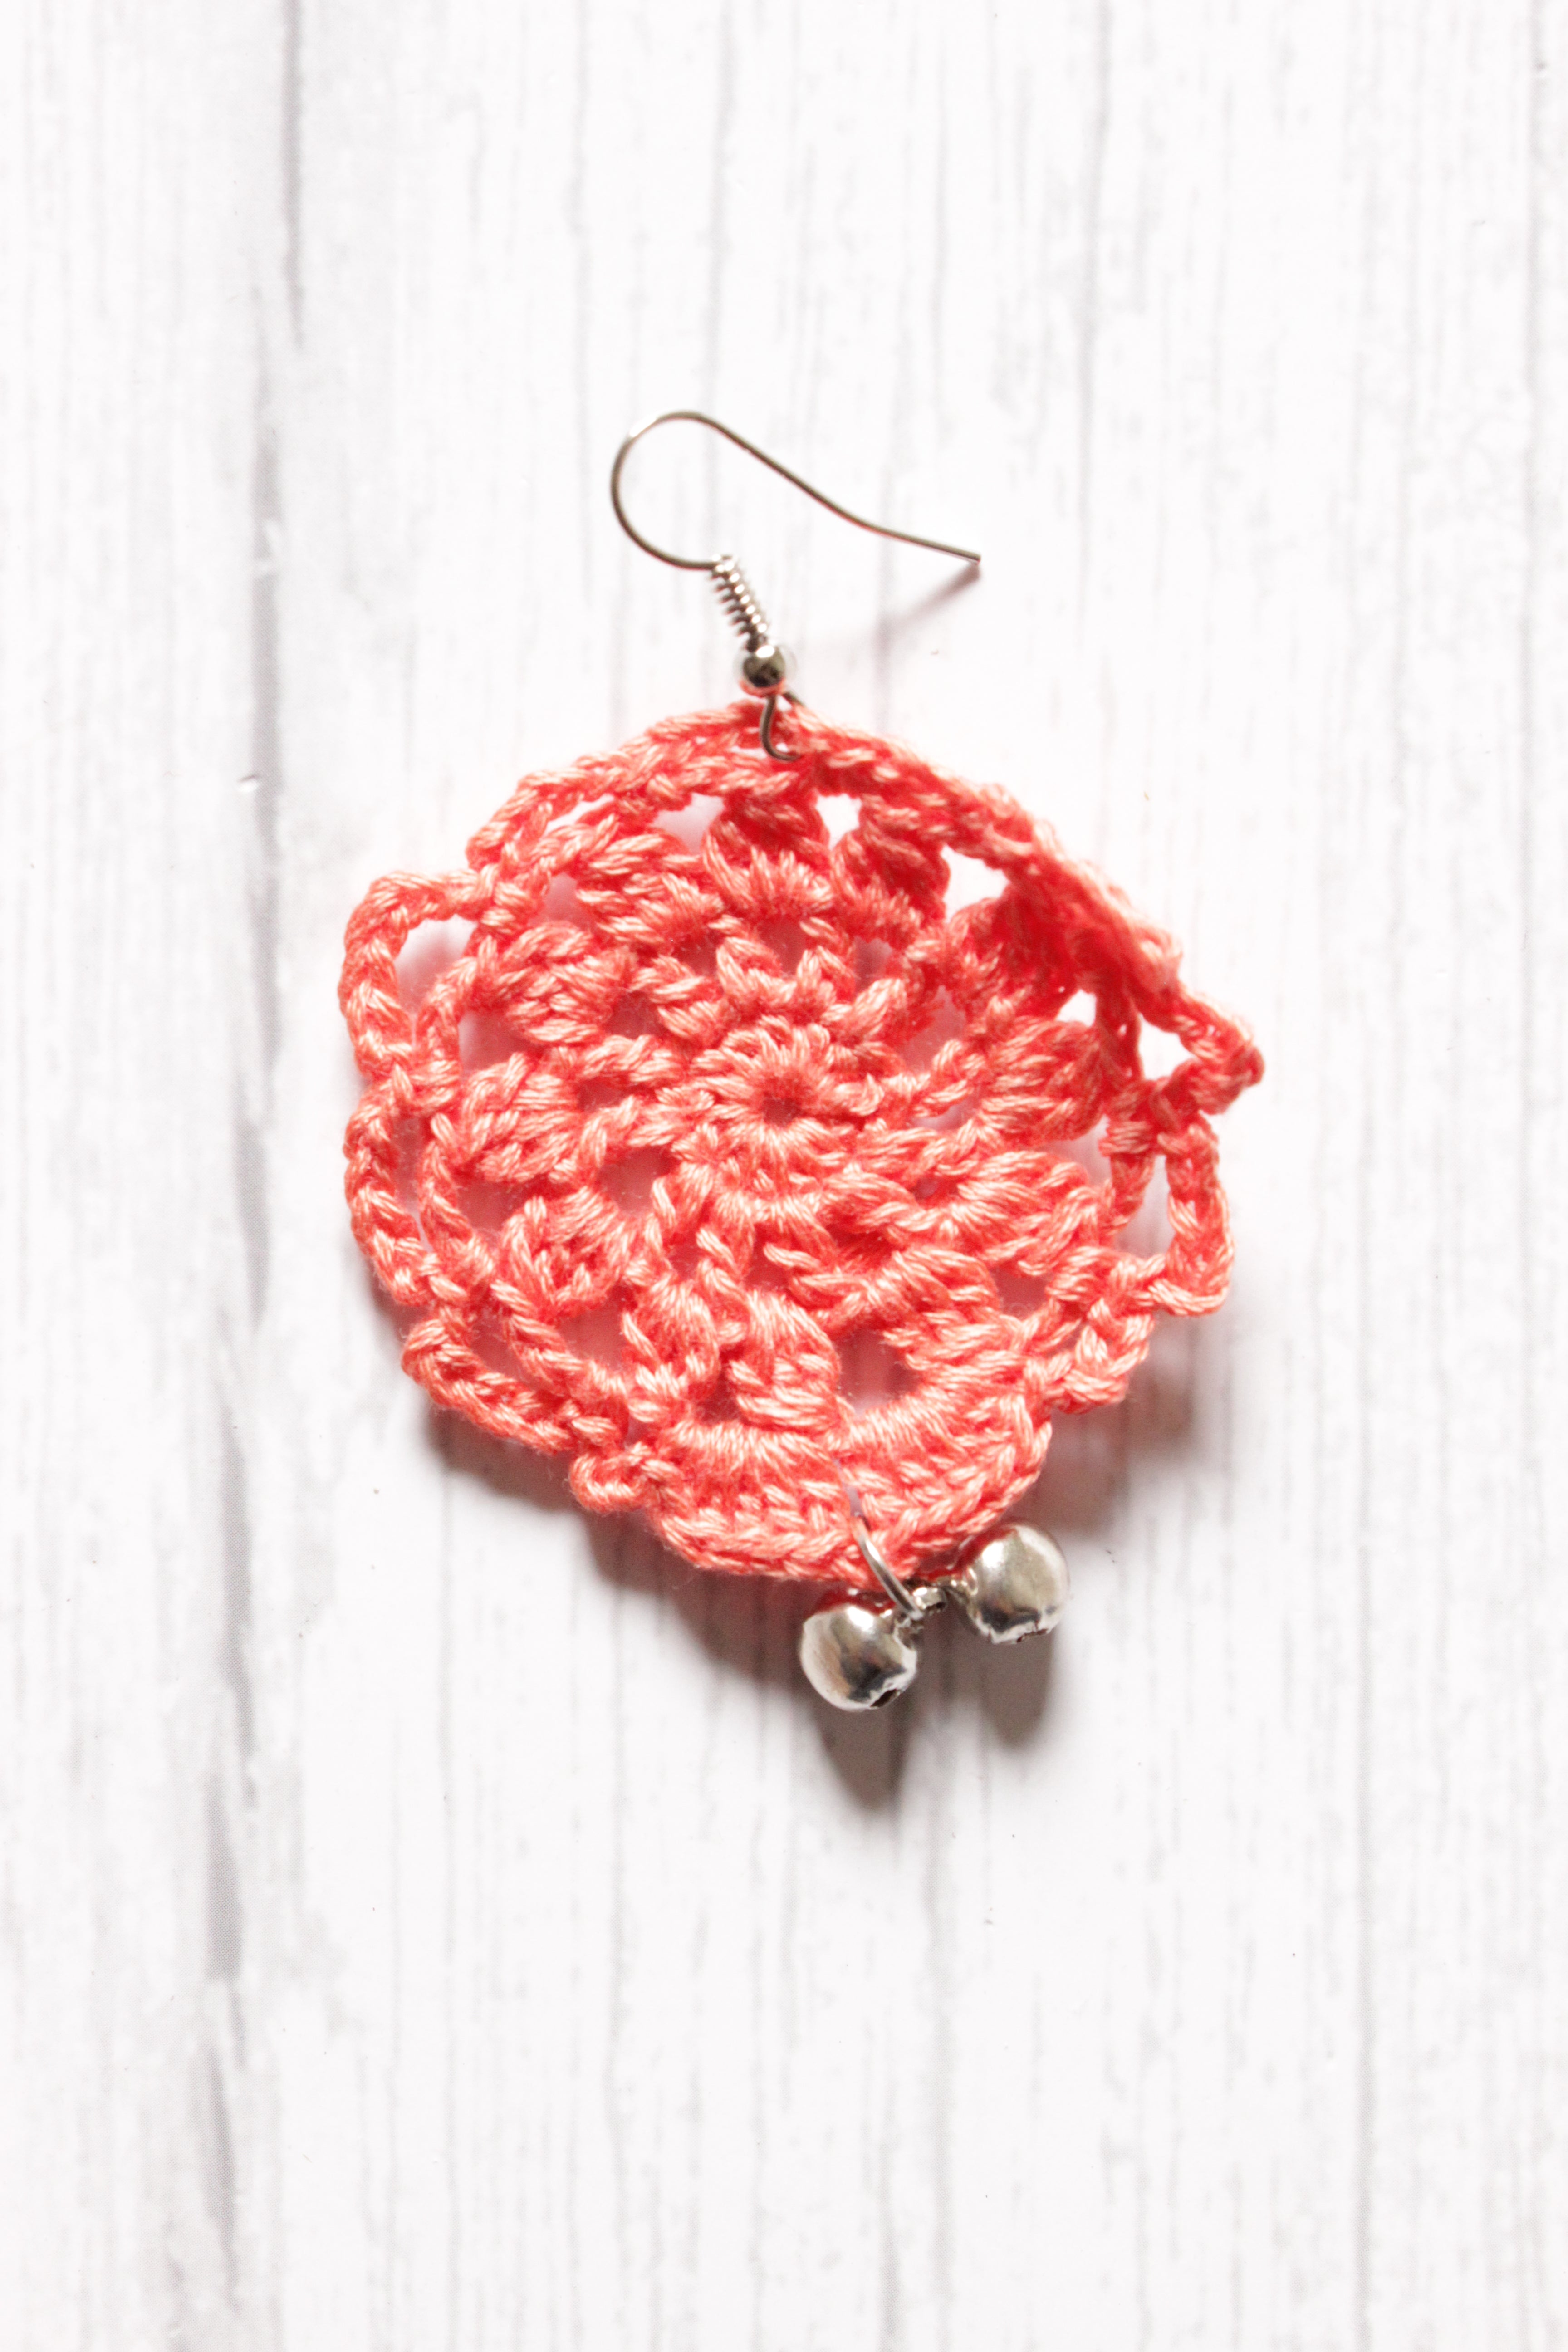 Peach Jaali Pattern Handcrafted Crochet Earrings Embellished with Ghungroo Beads